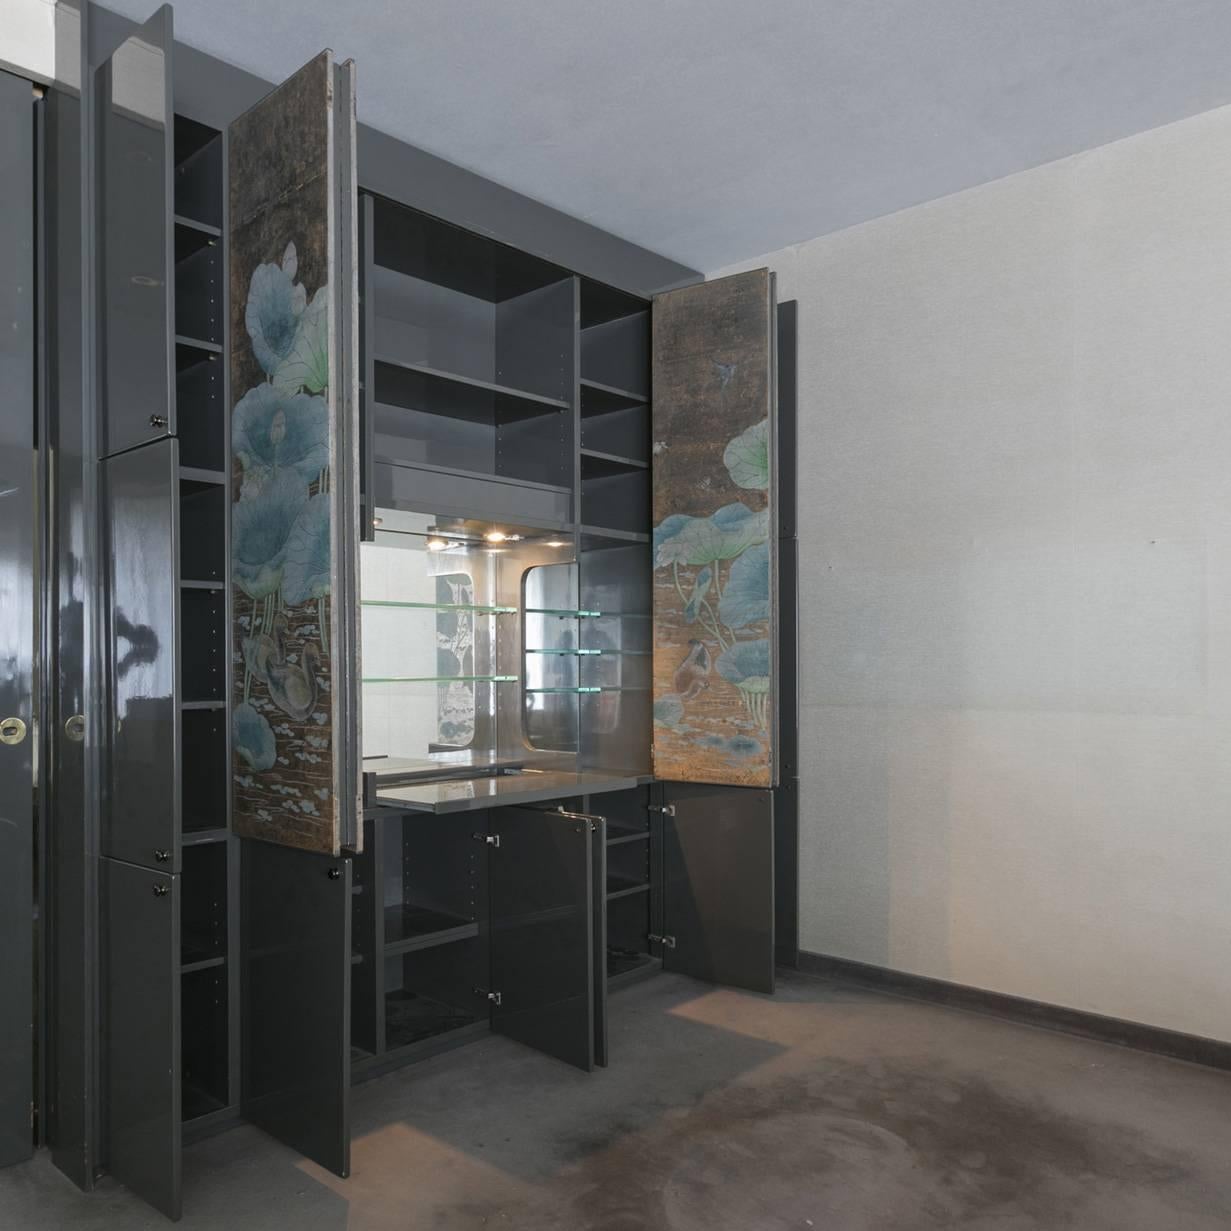 Remarkable dry bar cabinet by Luigi Caccia Dominioni for Azucena.
Custom-made piece features complete gray thick lacquered surfaces, glass shelves, two large folding doors with decorated panel.
The central area covered by the decoration has